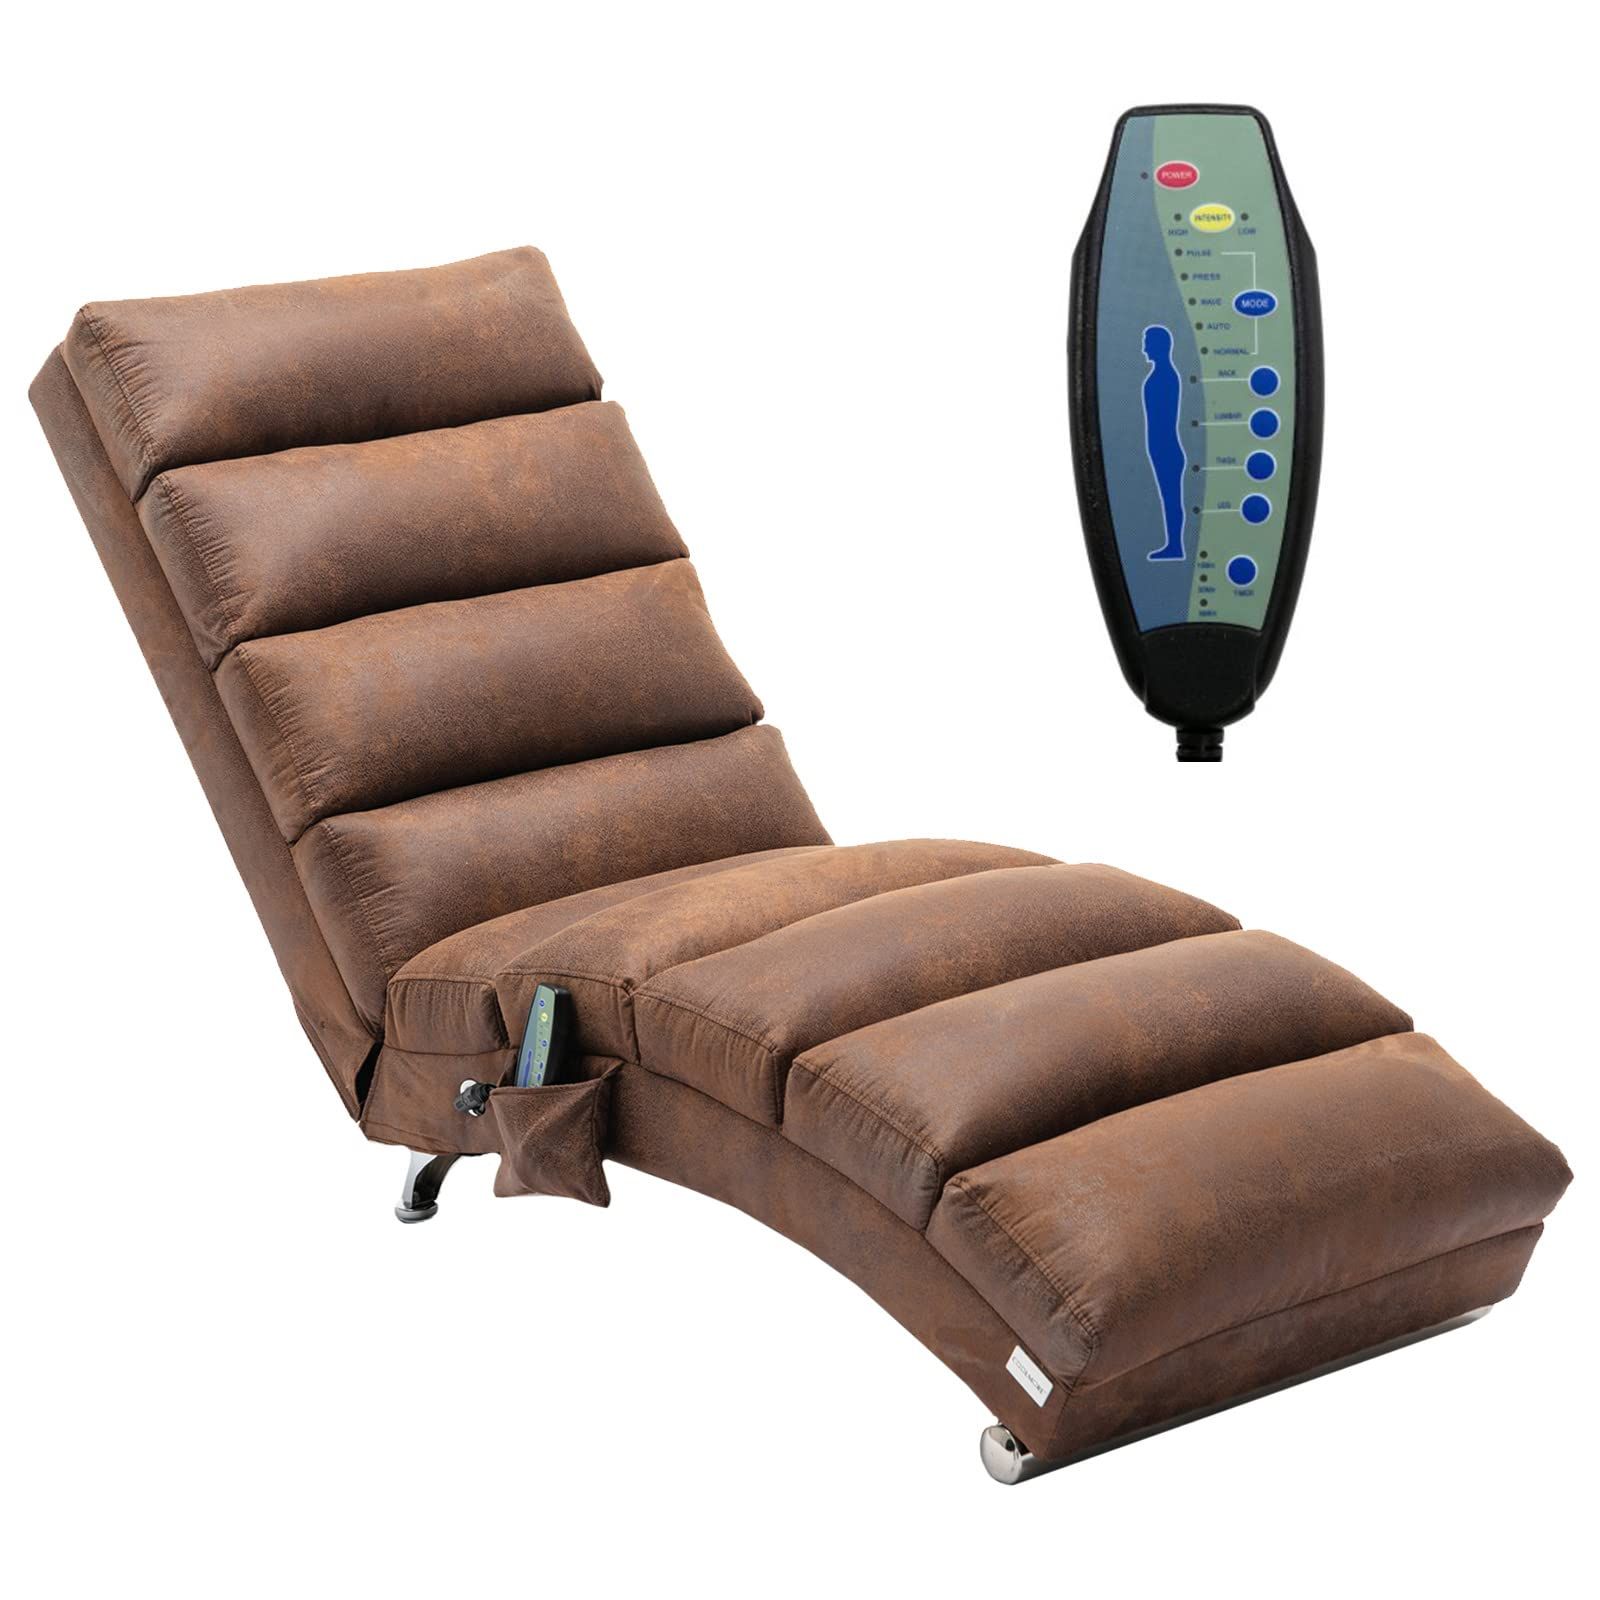 LETESA Massage Linen Chaise Lounge Indoor Chair, Electric Recliner Chair, Sleeper Chair, Upholstered | Amazon (US)